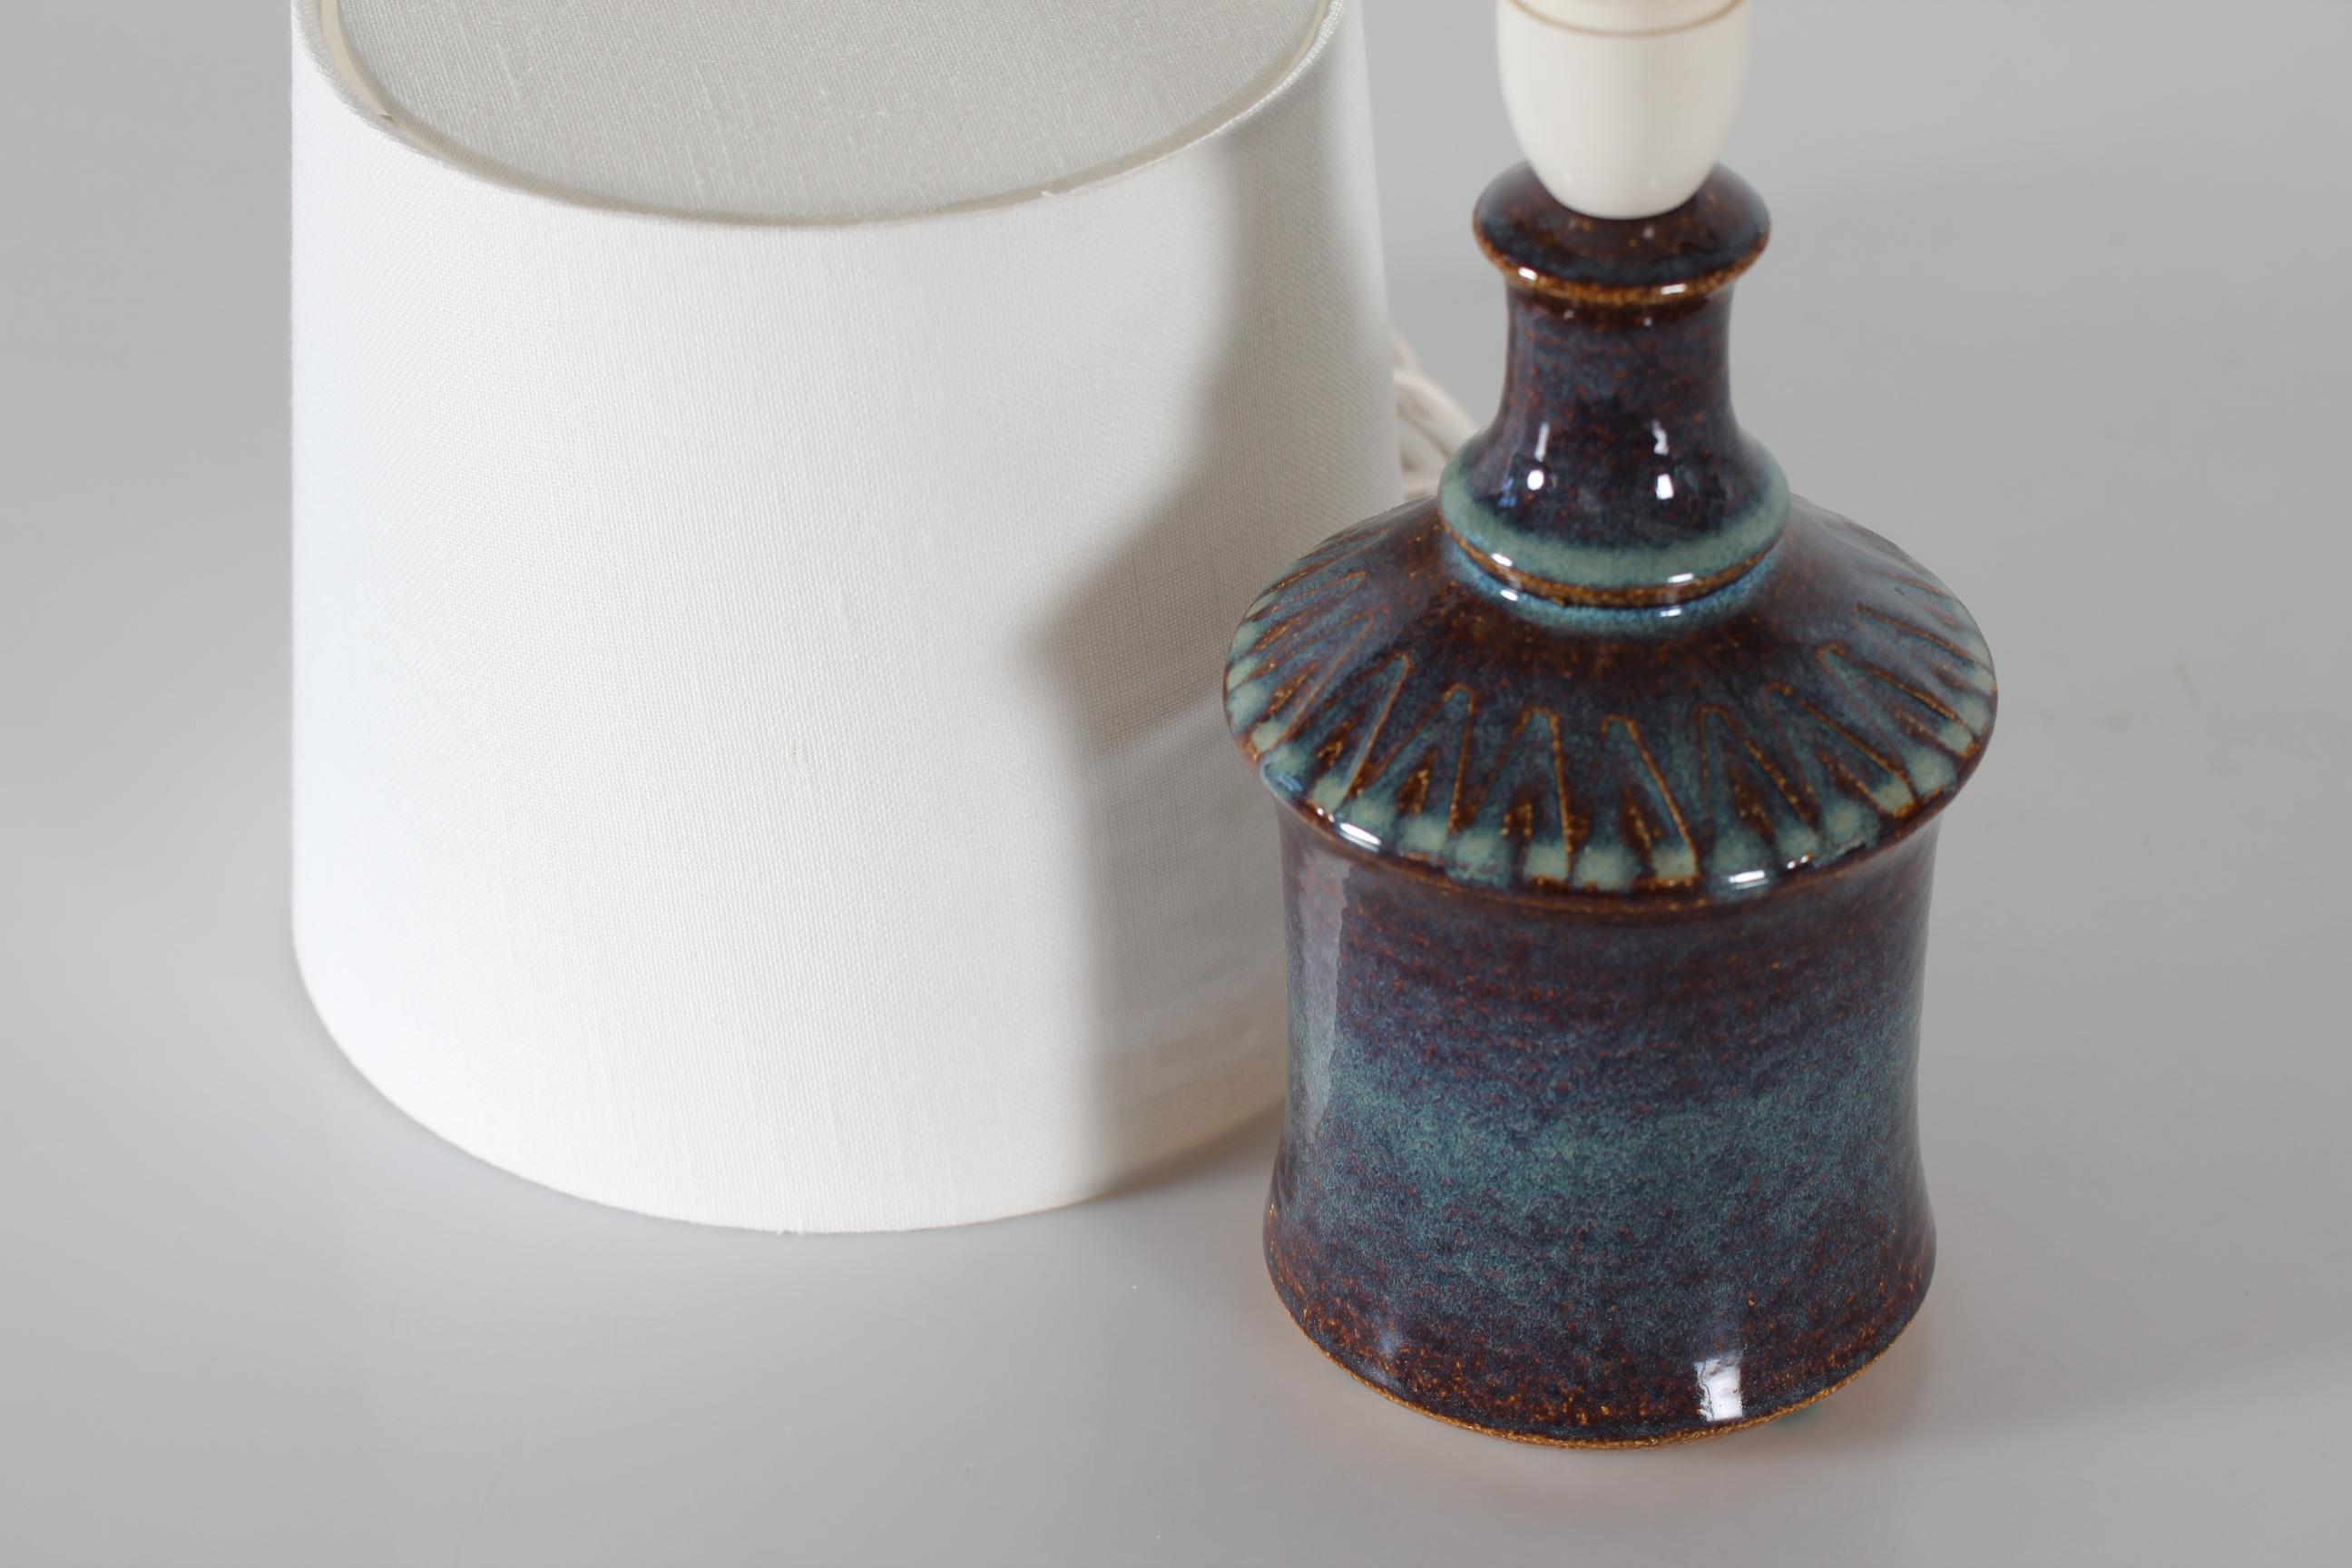 Danish Søholm Ceramic Table Lamp with Blue + Turquoise Glaze + New Shade, 1960s For Sale 4